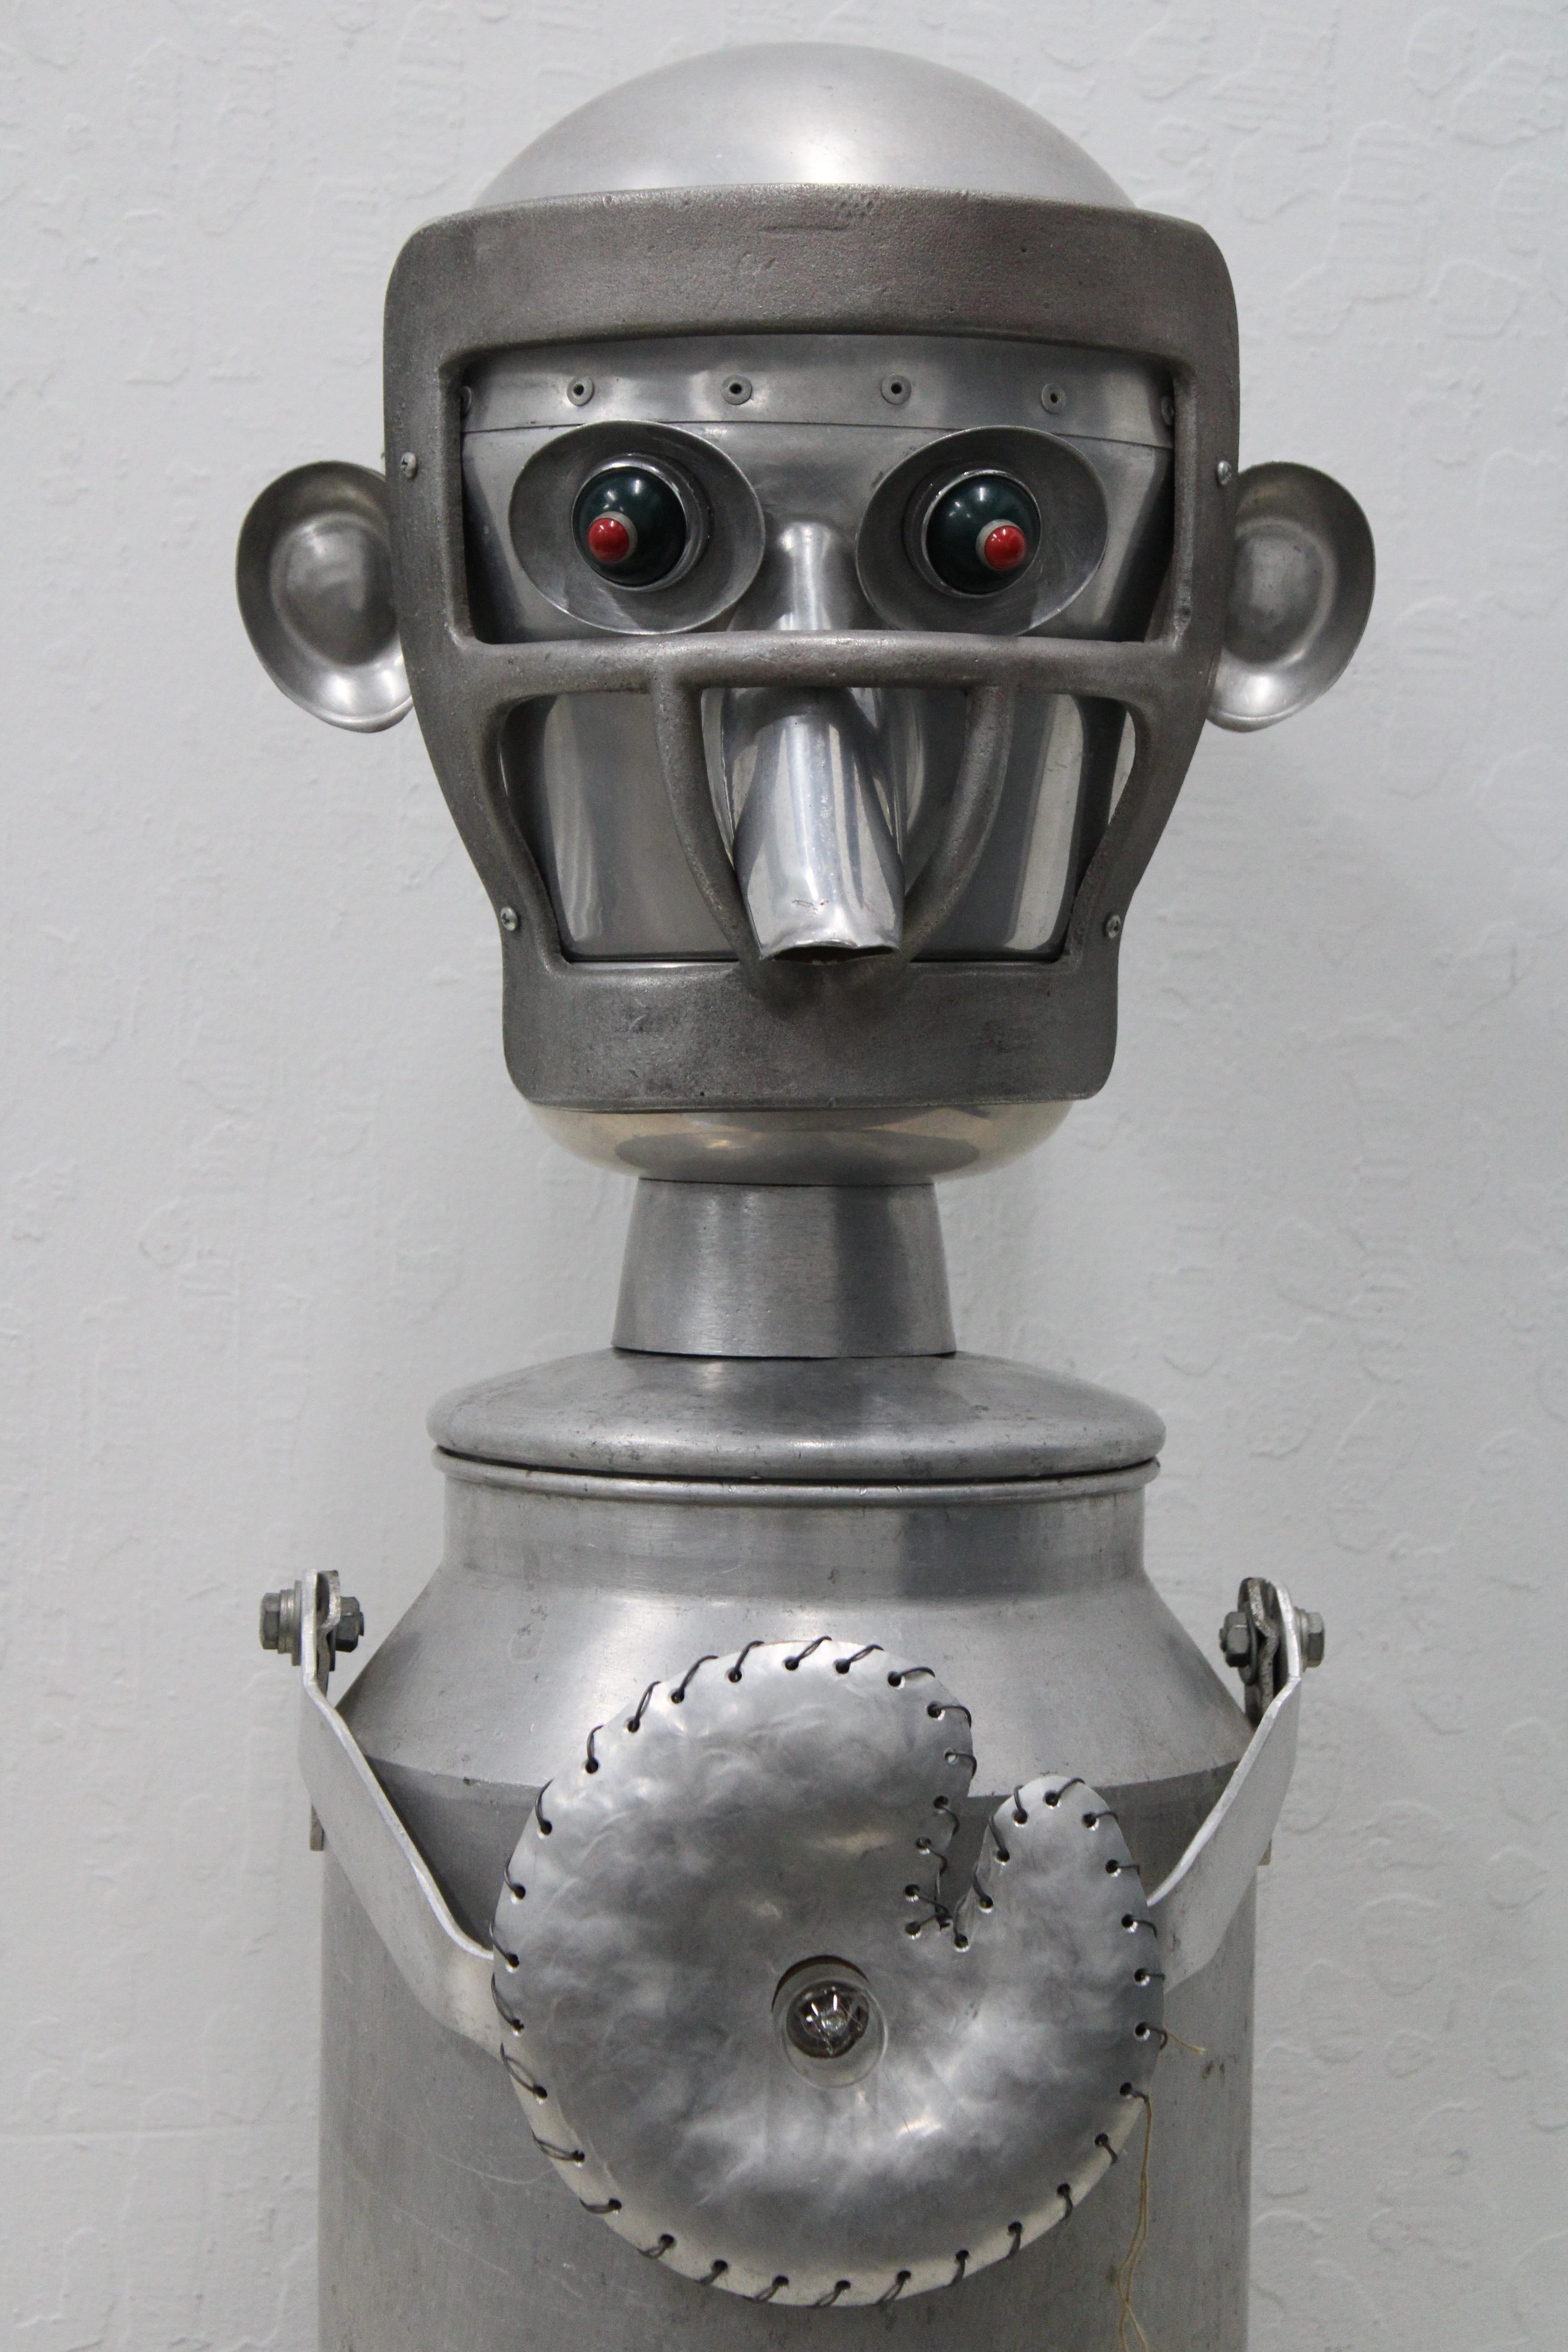 C. 20th Century

Jim Bauer Hand Made Tin Robot ( Signed )

This Tin Robot Plugs in and Lights up ( Lights on Stomach & Eyes ).